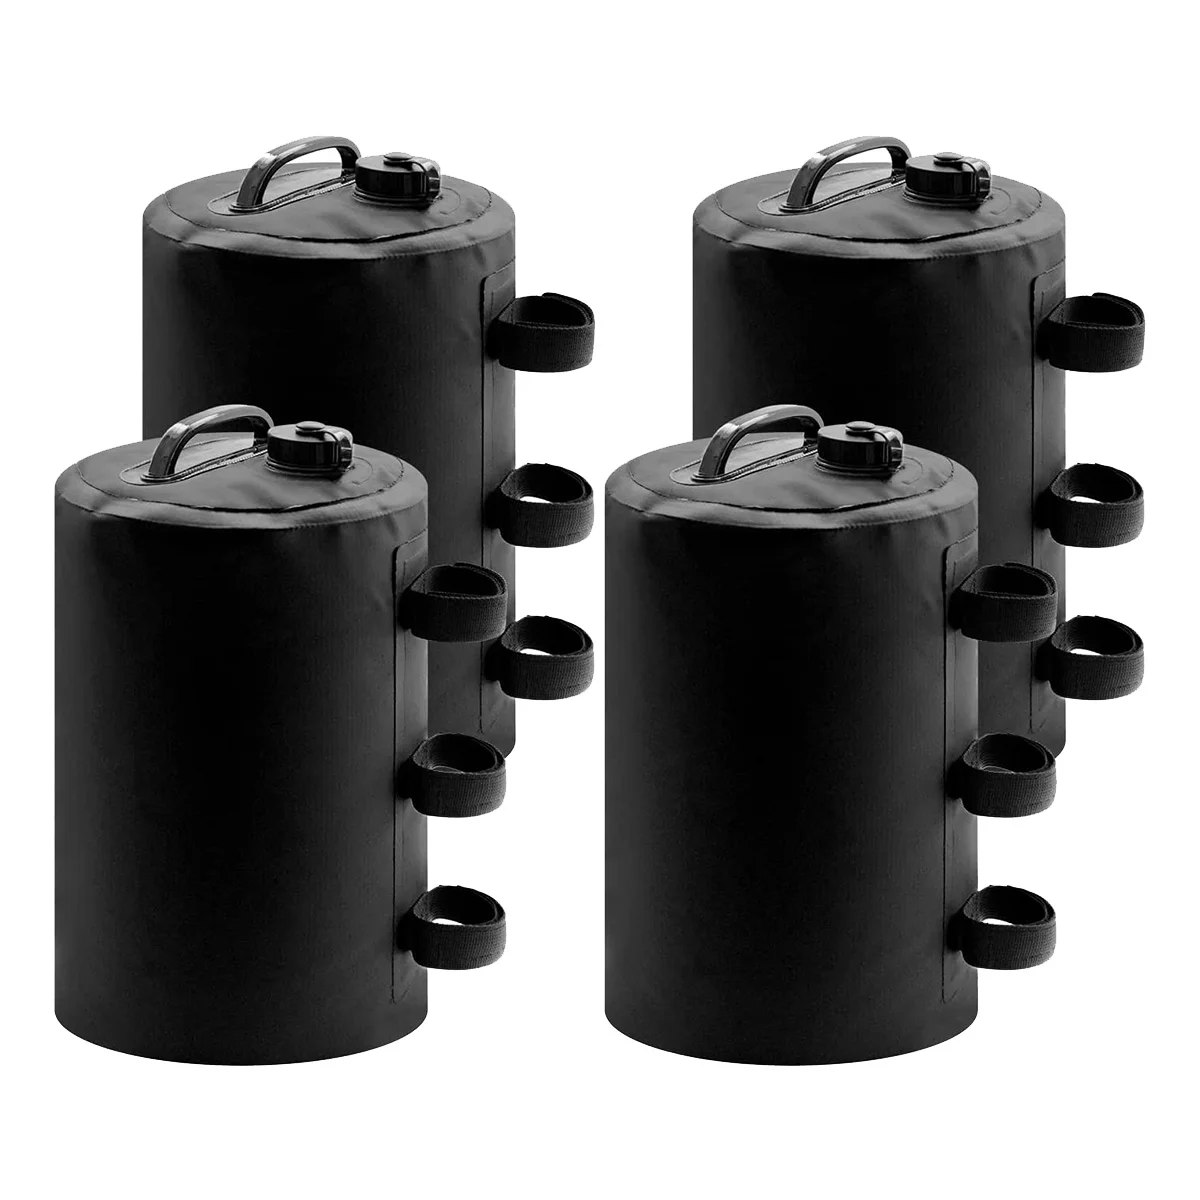 

4Pcs Canopy Water Weights,10L Tent Water Weights Heavy Duty Canopy Weights Tents Legging Accessories(Black)